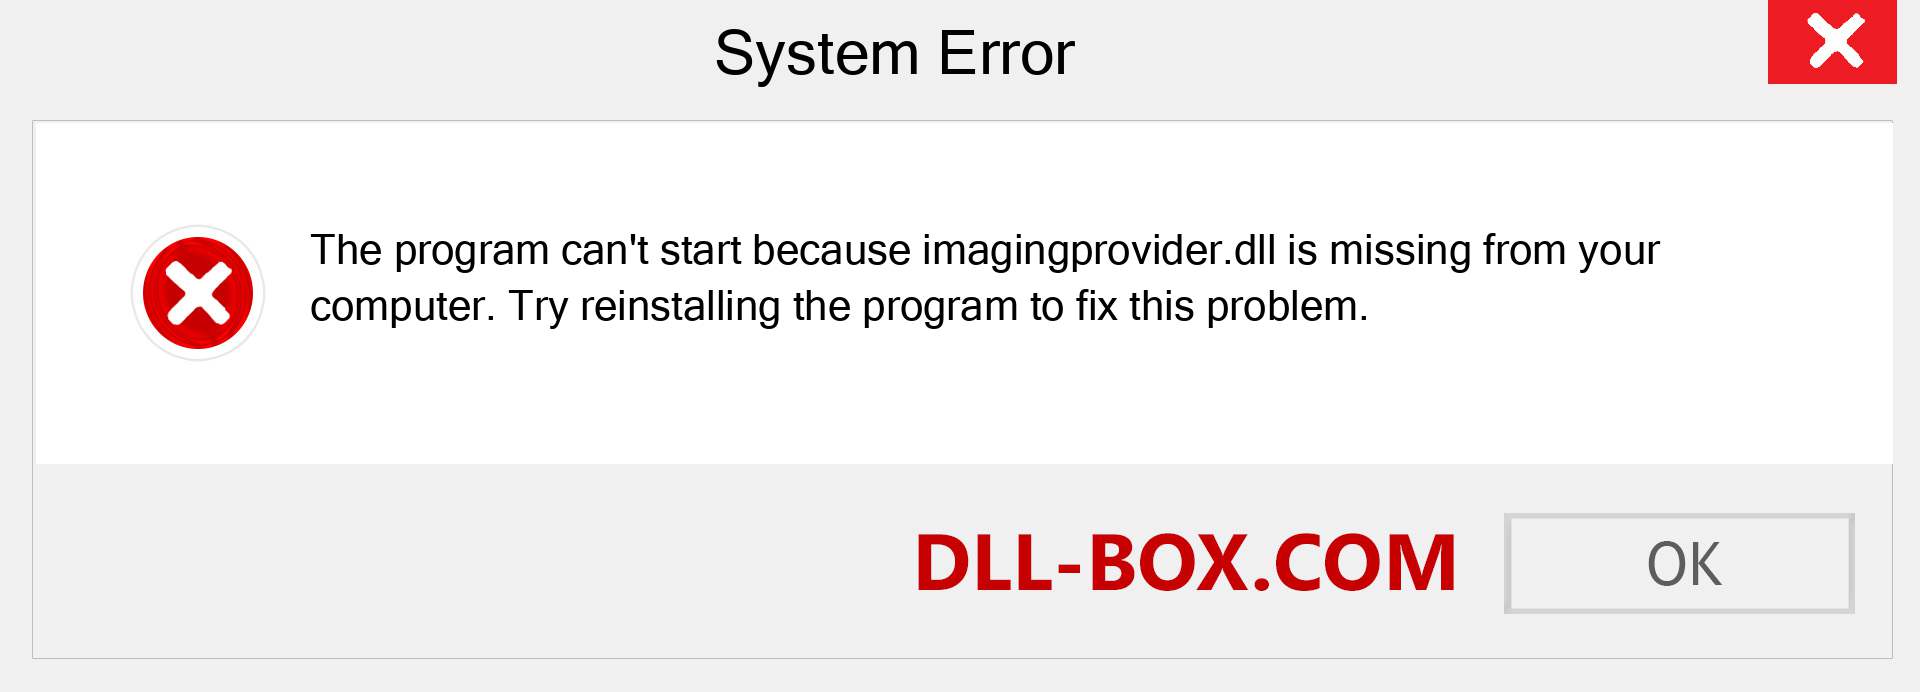  imagingprovider.dll file is missing?. Download for Windows 7, 8, 10 - Fix  imagingprovider dll Missing Error on Windows, photos, images